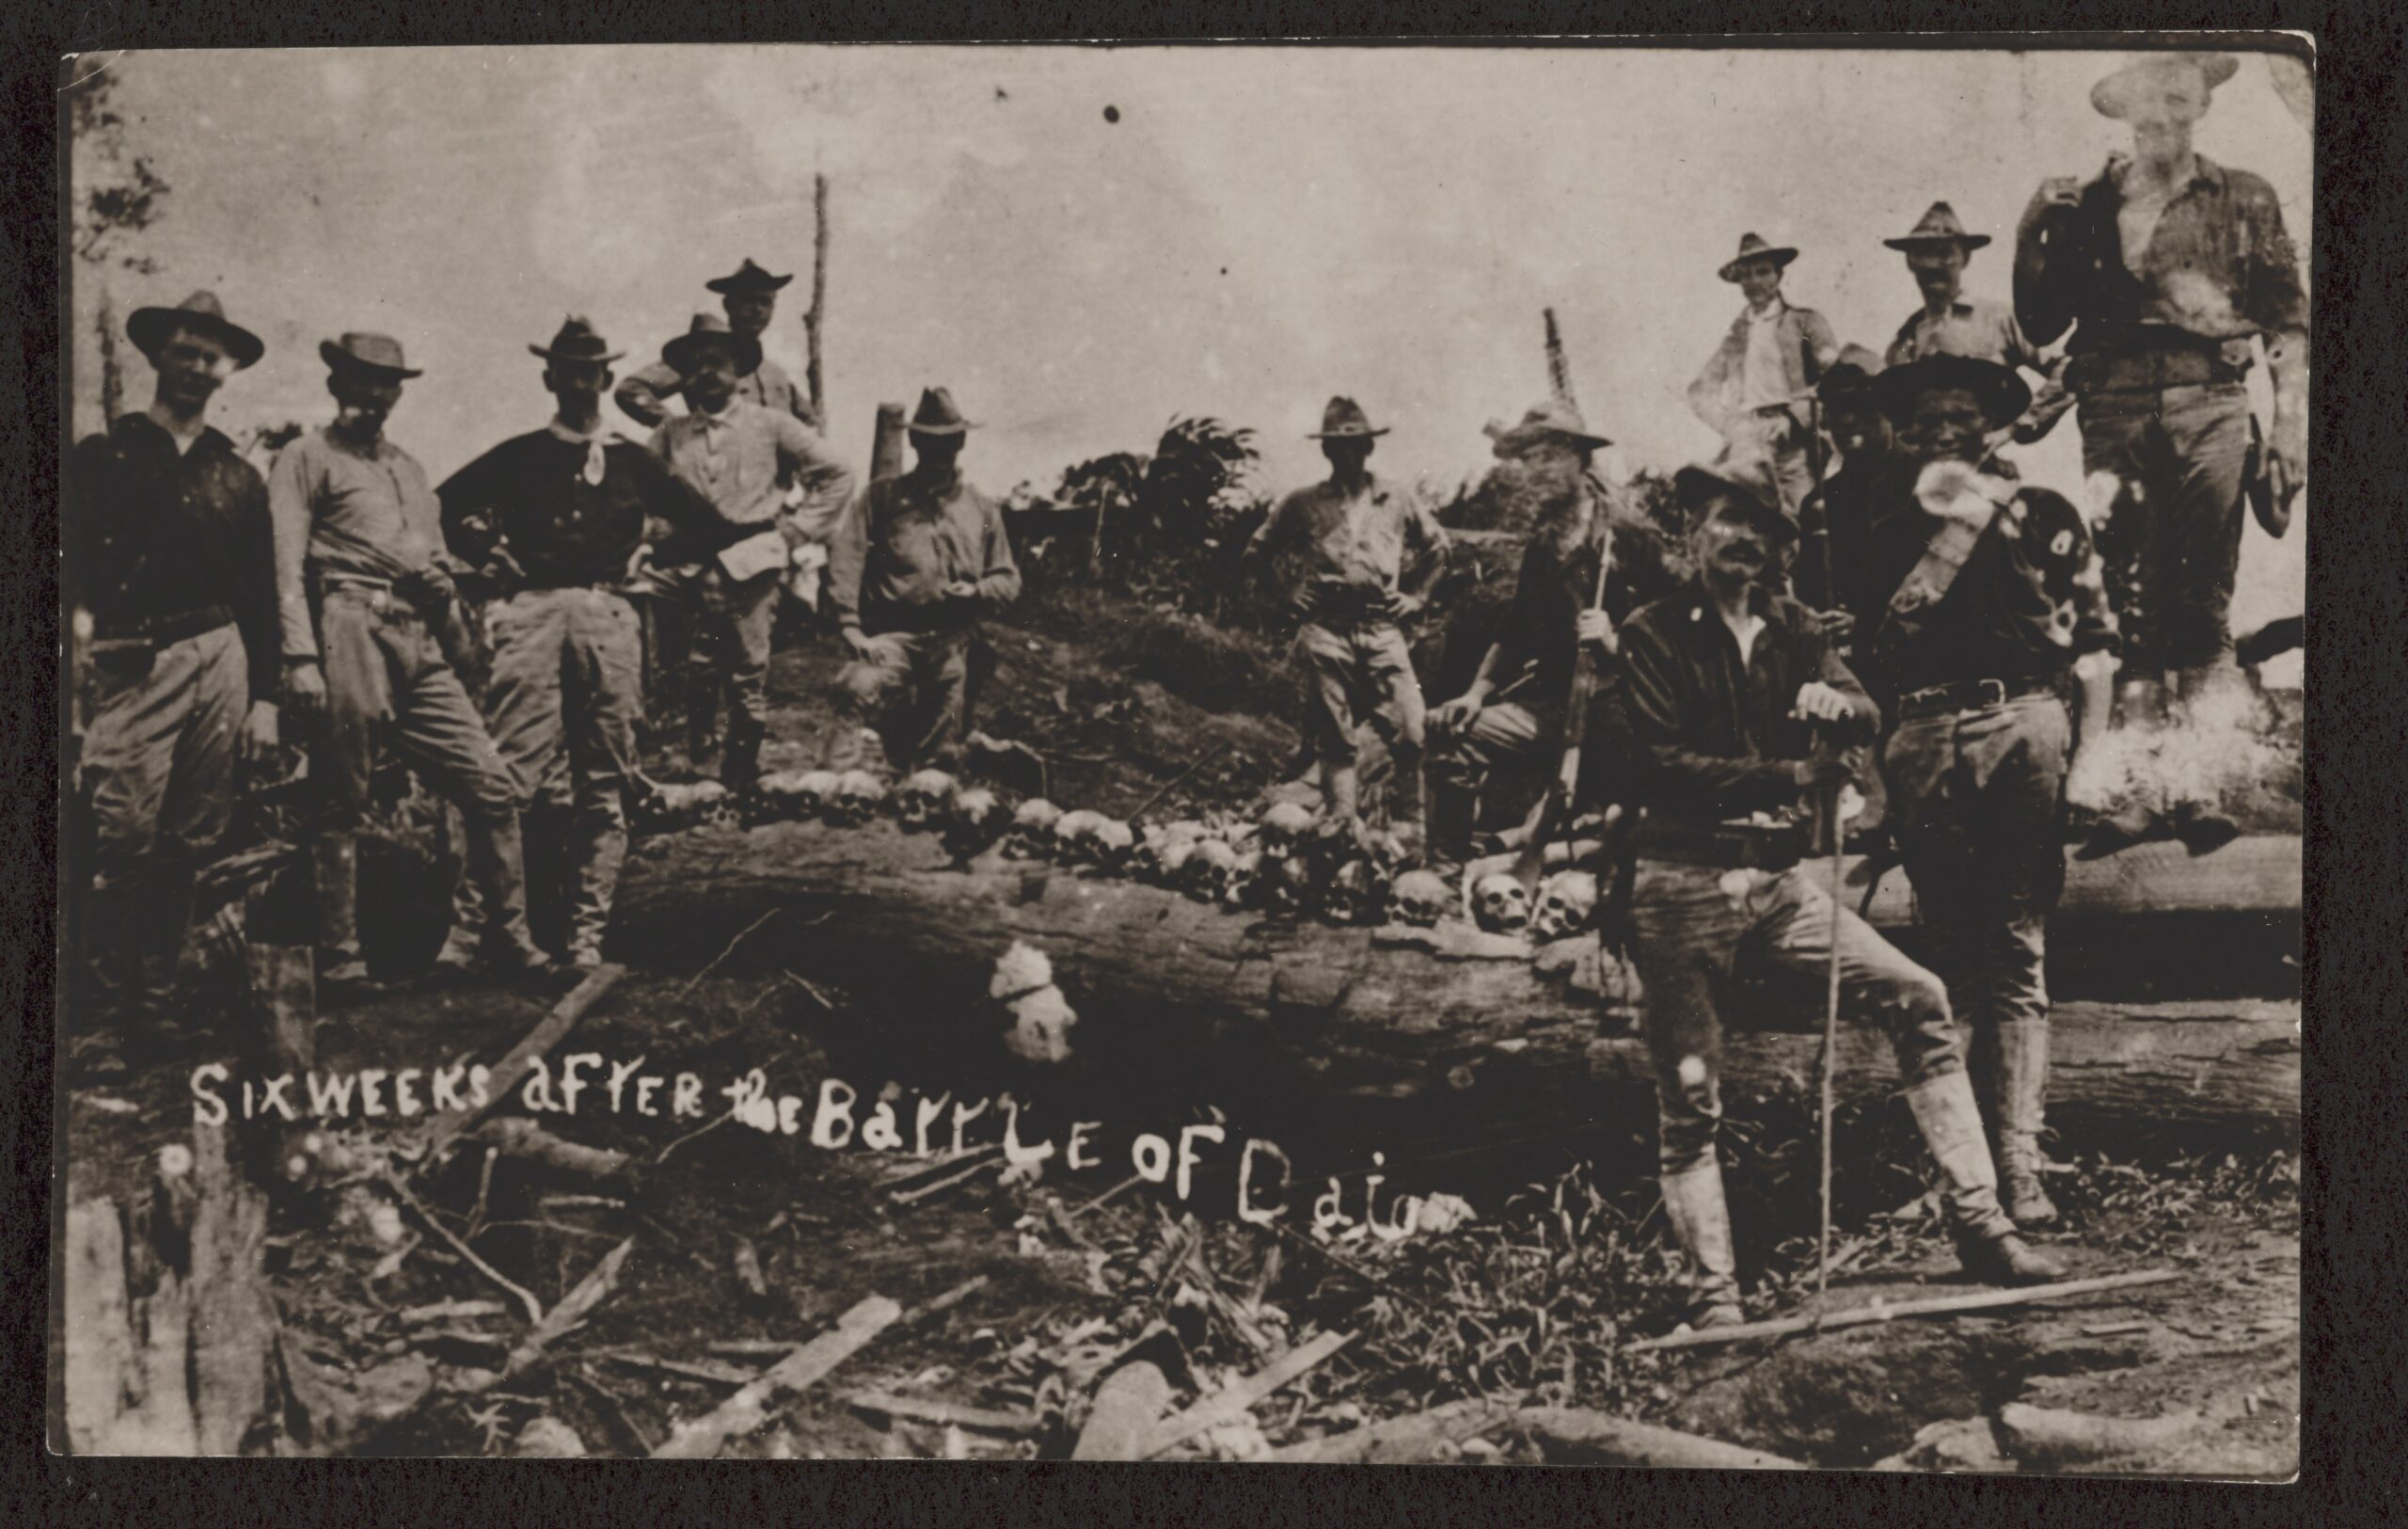 Soldiers displaying skulls after a battle in the Philippines